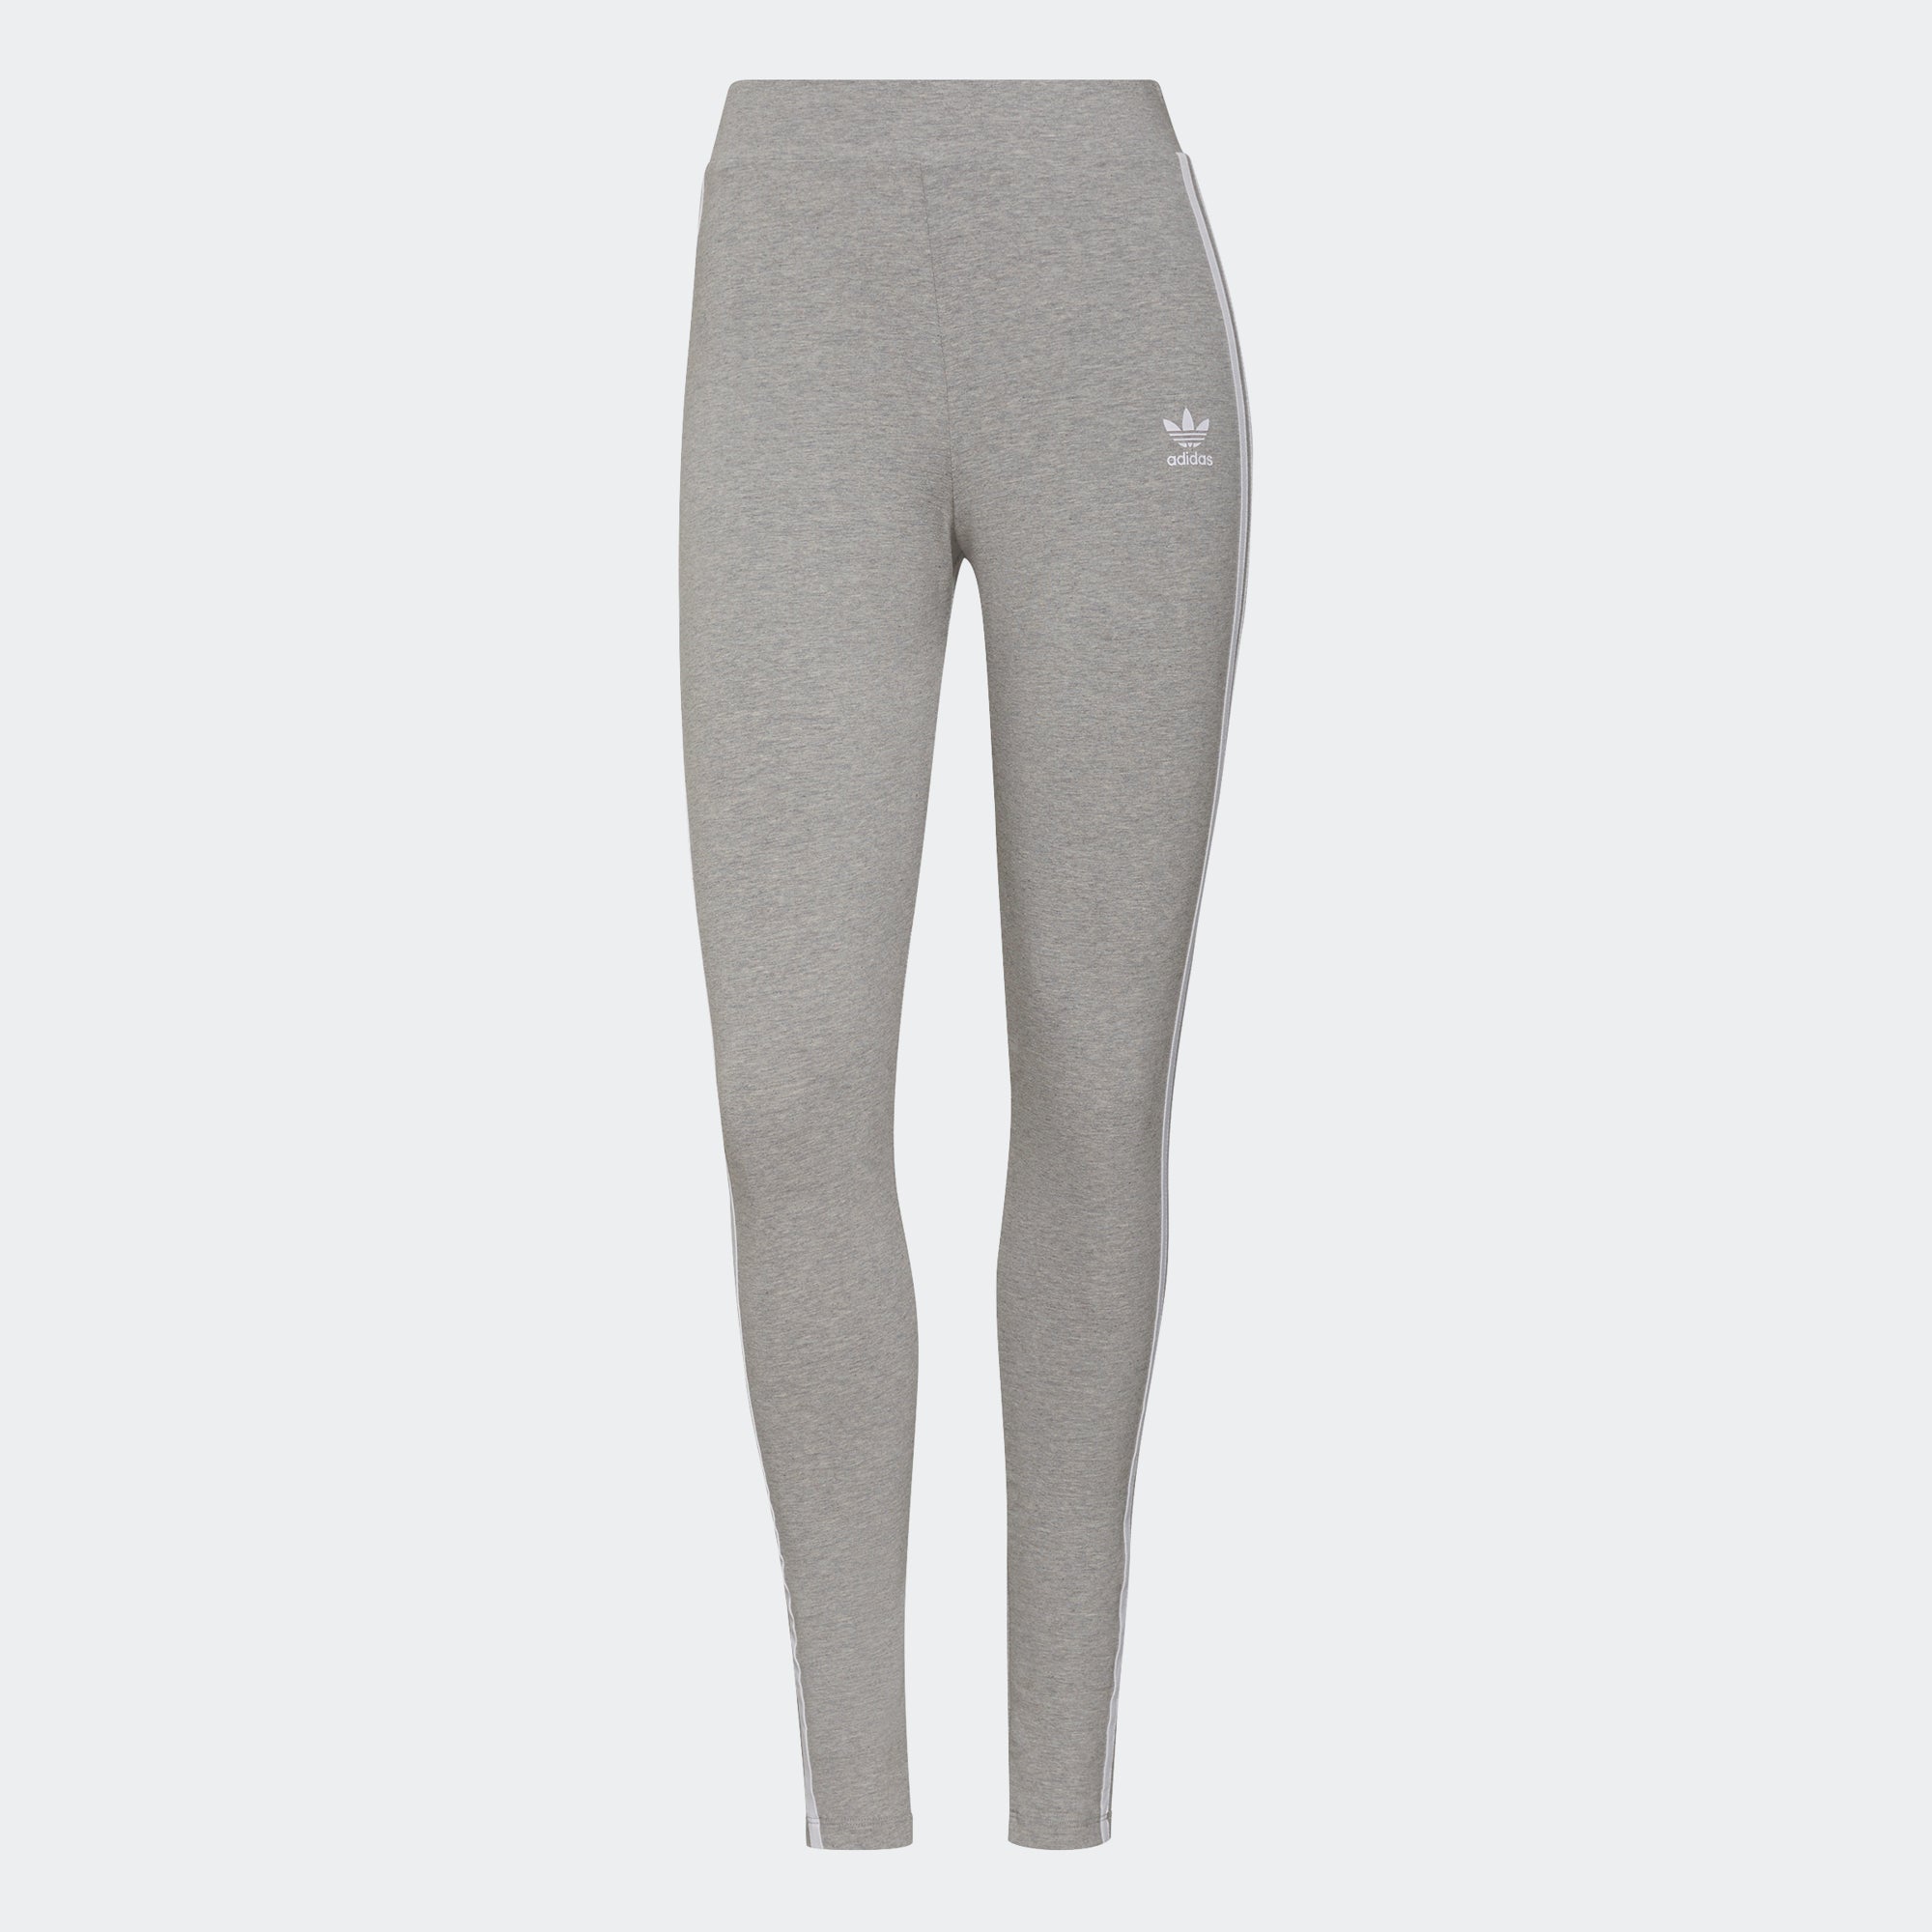 Buy Adidas Blue Slim Fit High Rise Tights for Women's Online @ Tata CLiQ